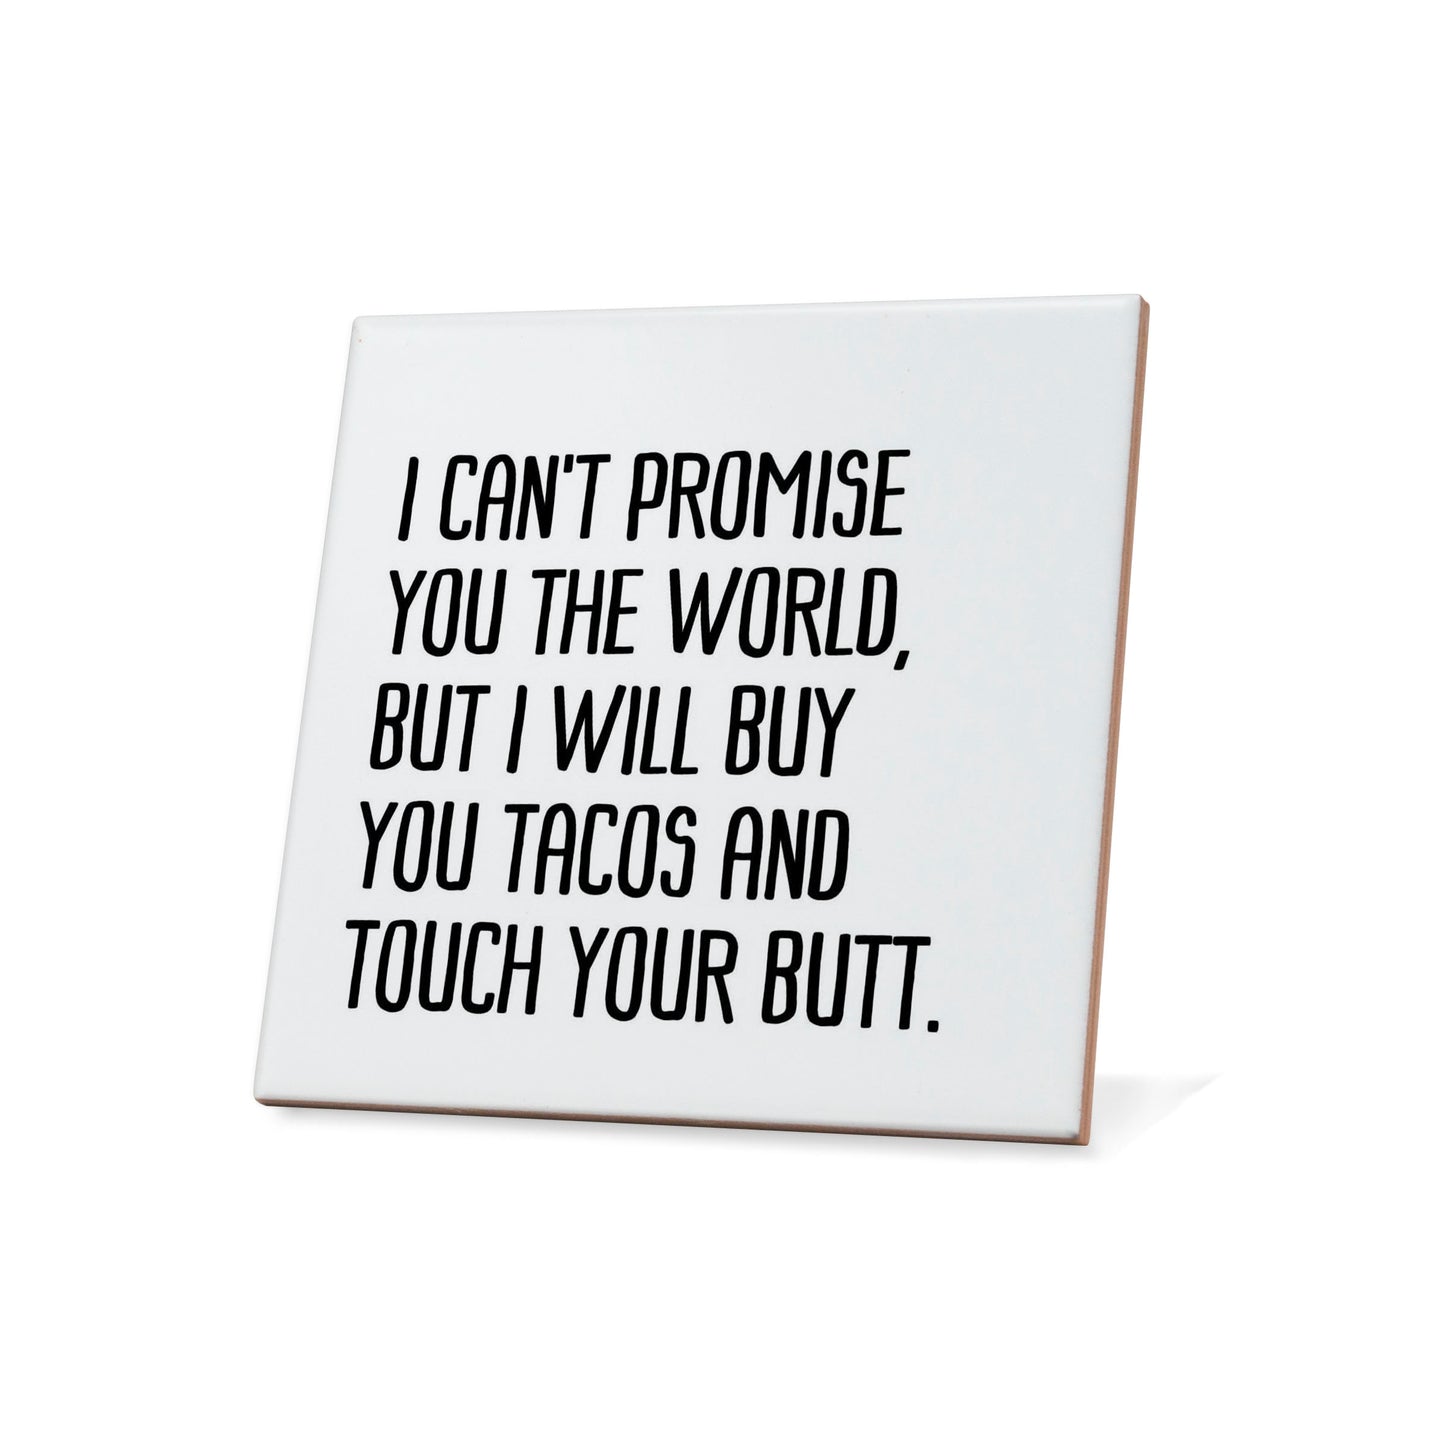 I can't promise you the world, but I will buy tacos and touch your butt. Quote Coaster